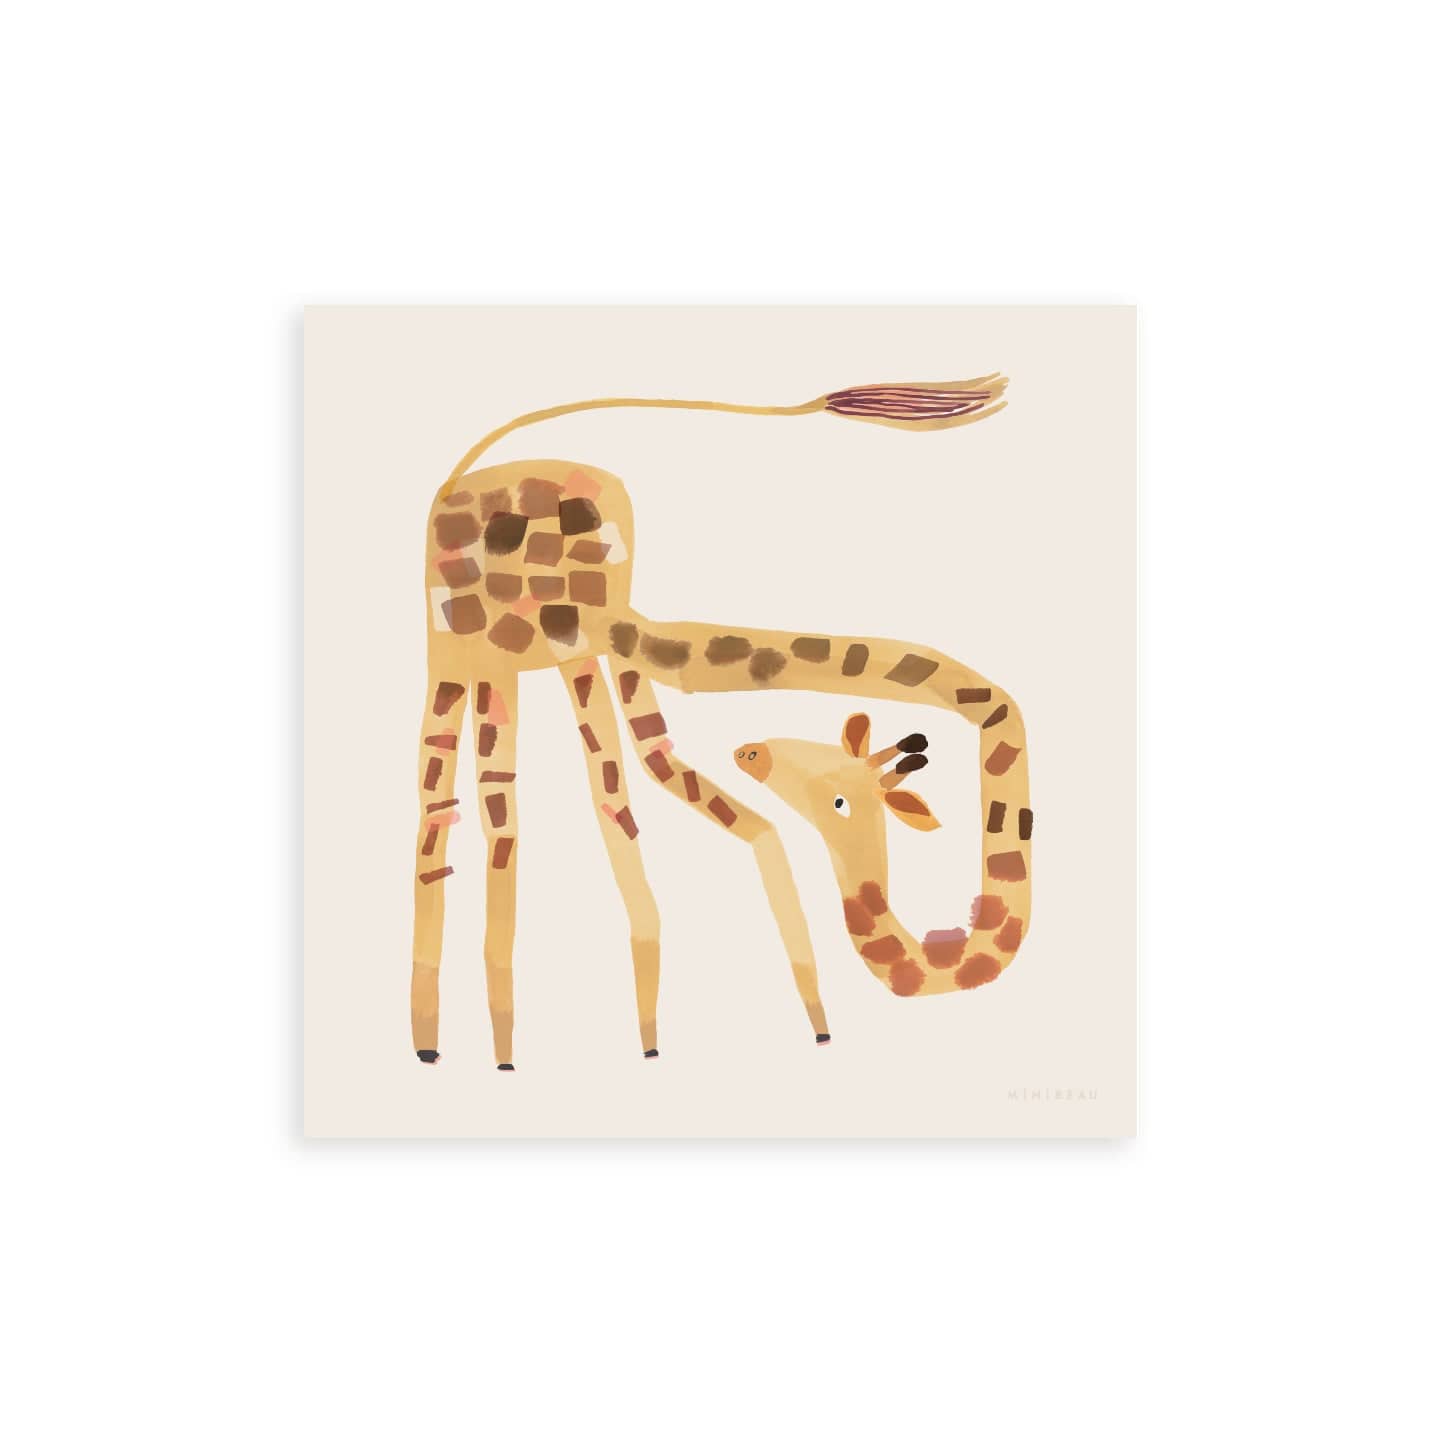 Our square Giraffe art print shows a cartoon giraffe with it's tail in the air and it's bending neck looking round its shoulders on a neutral background.